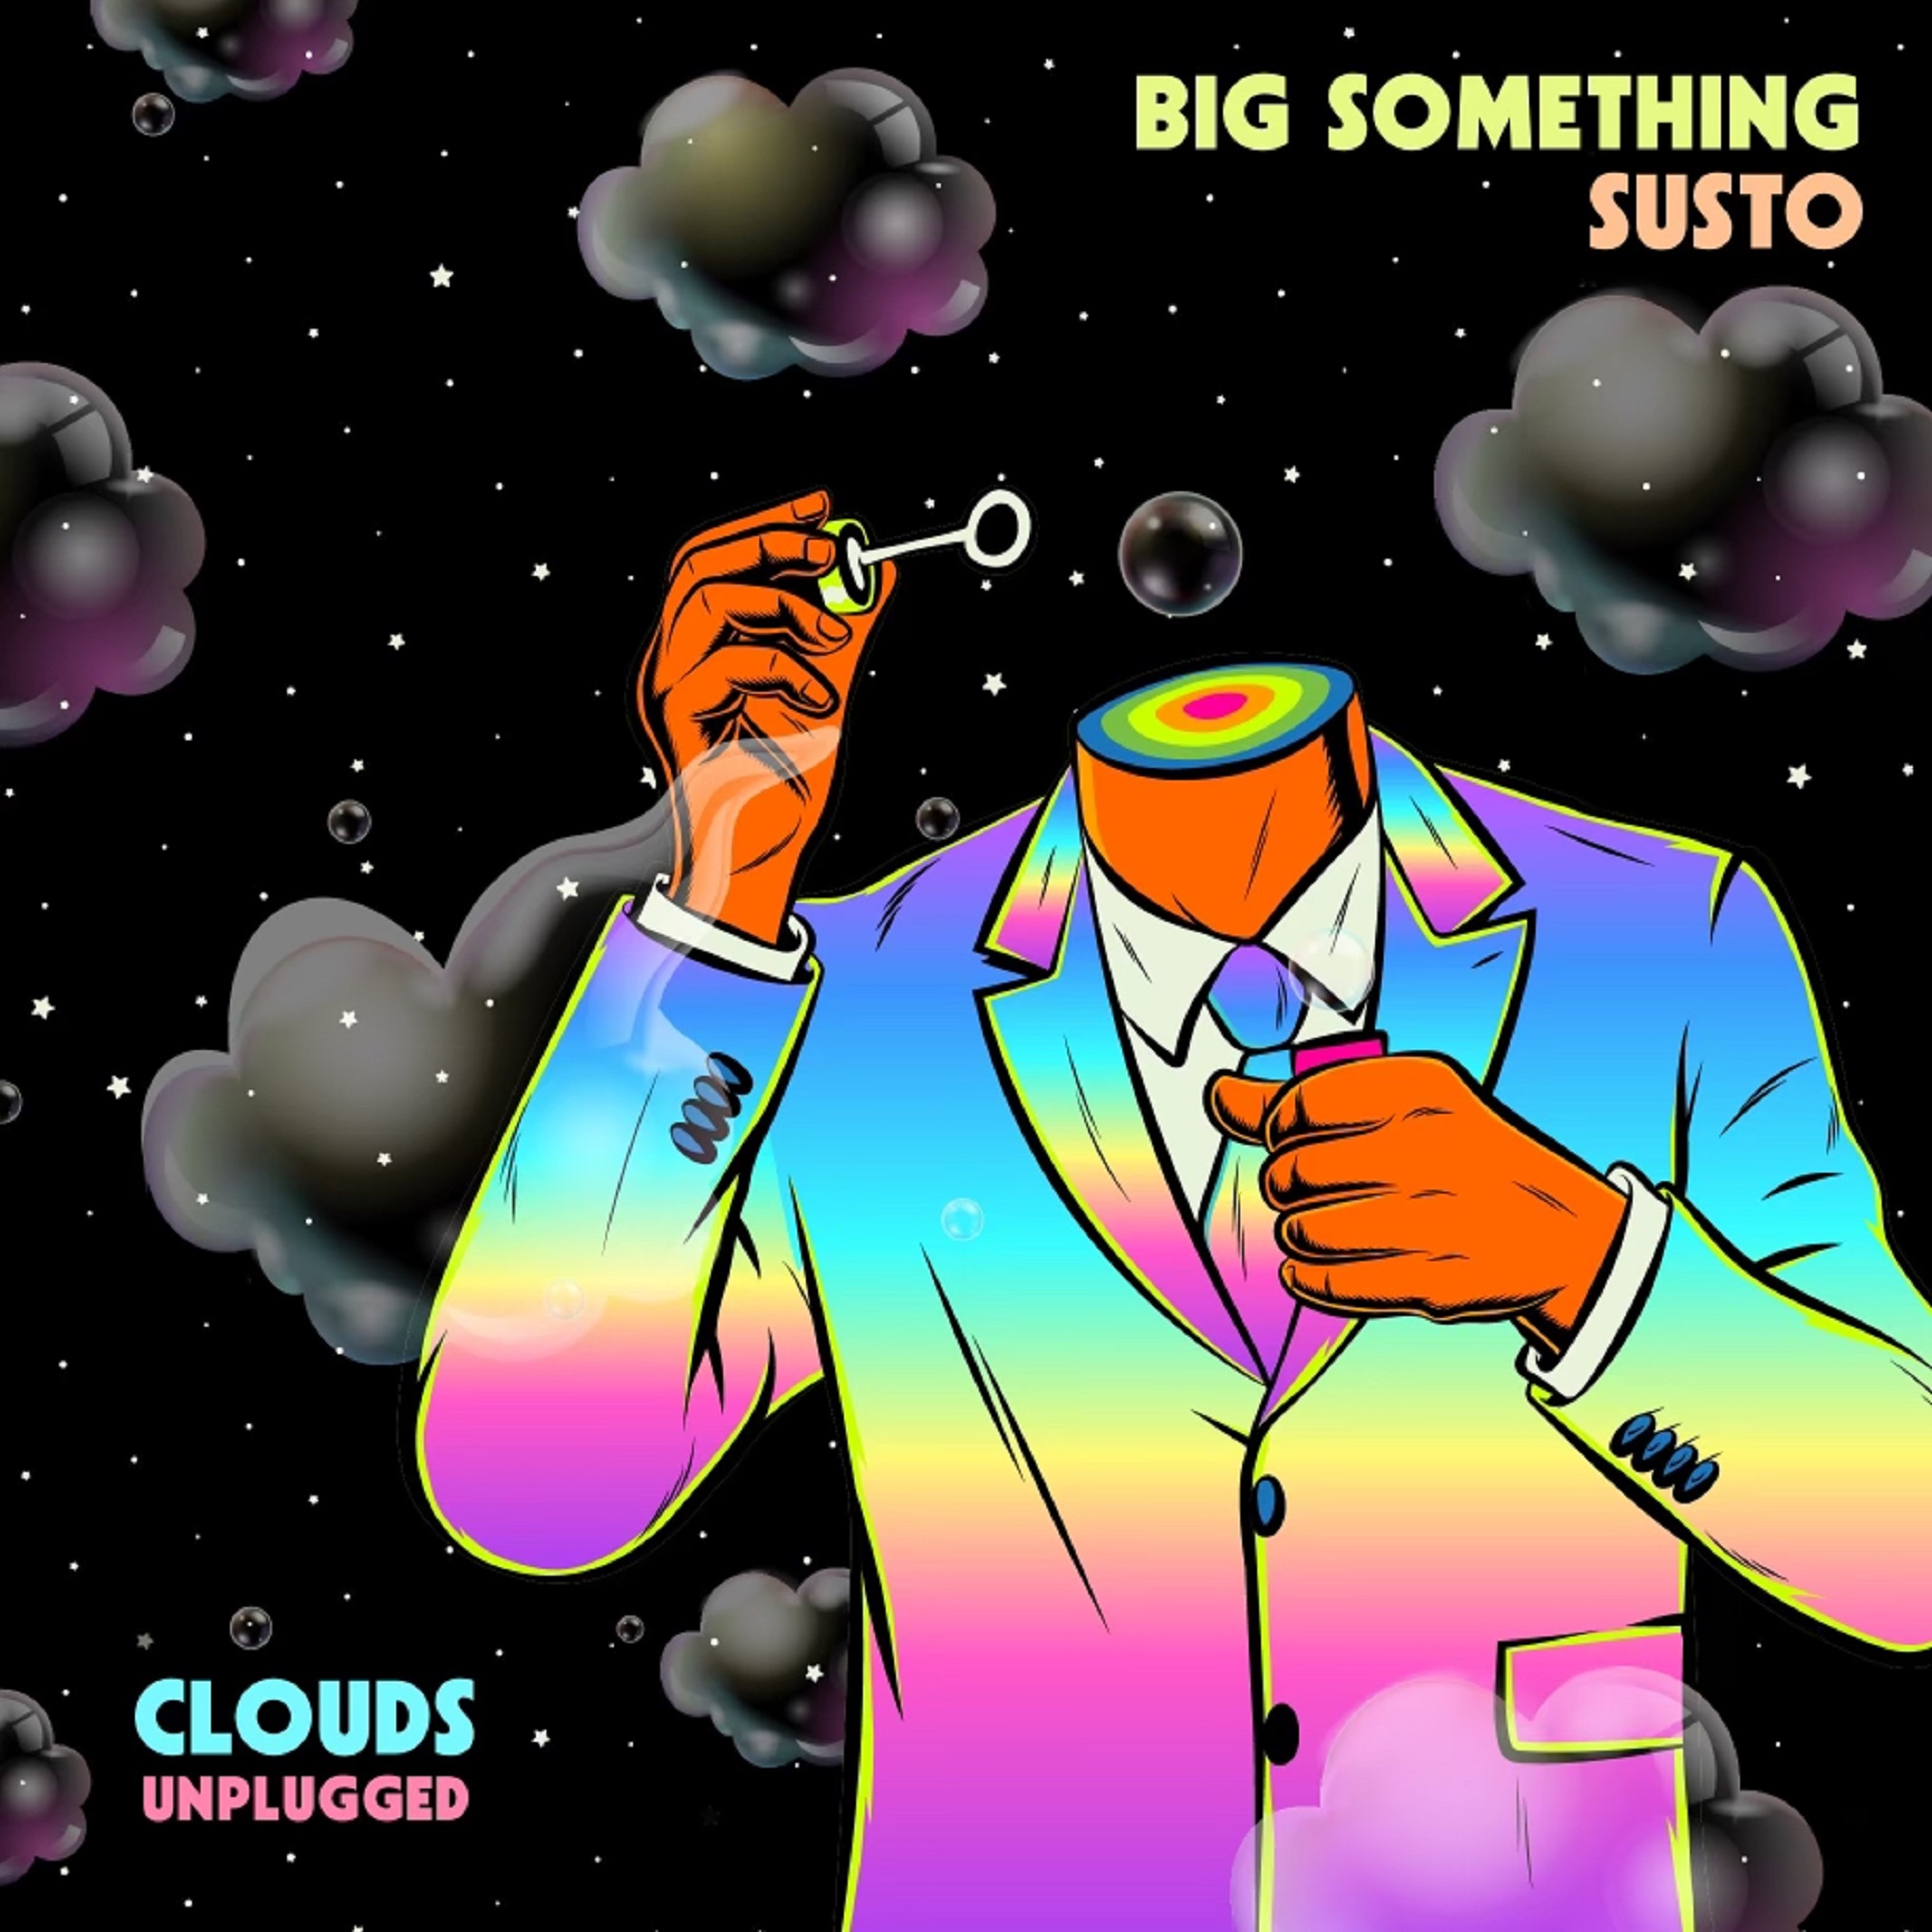 Big Something Enlists SUSTO for Haunting New Single “Clouds Unplugged”